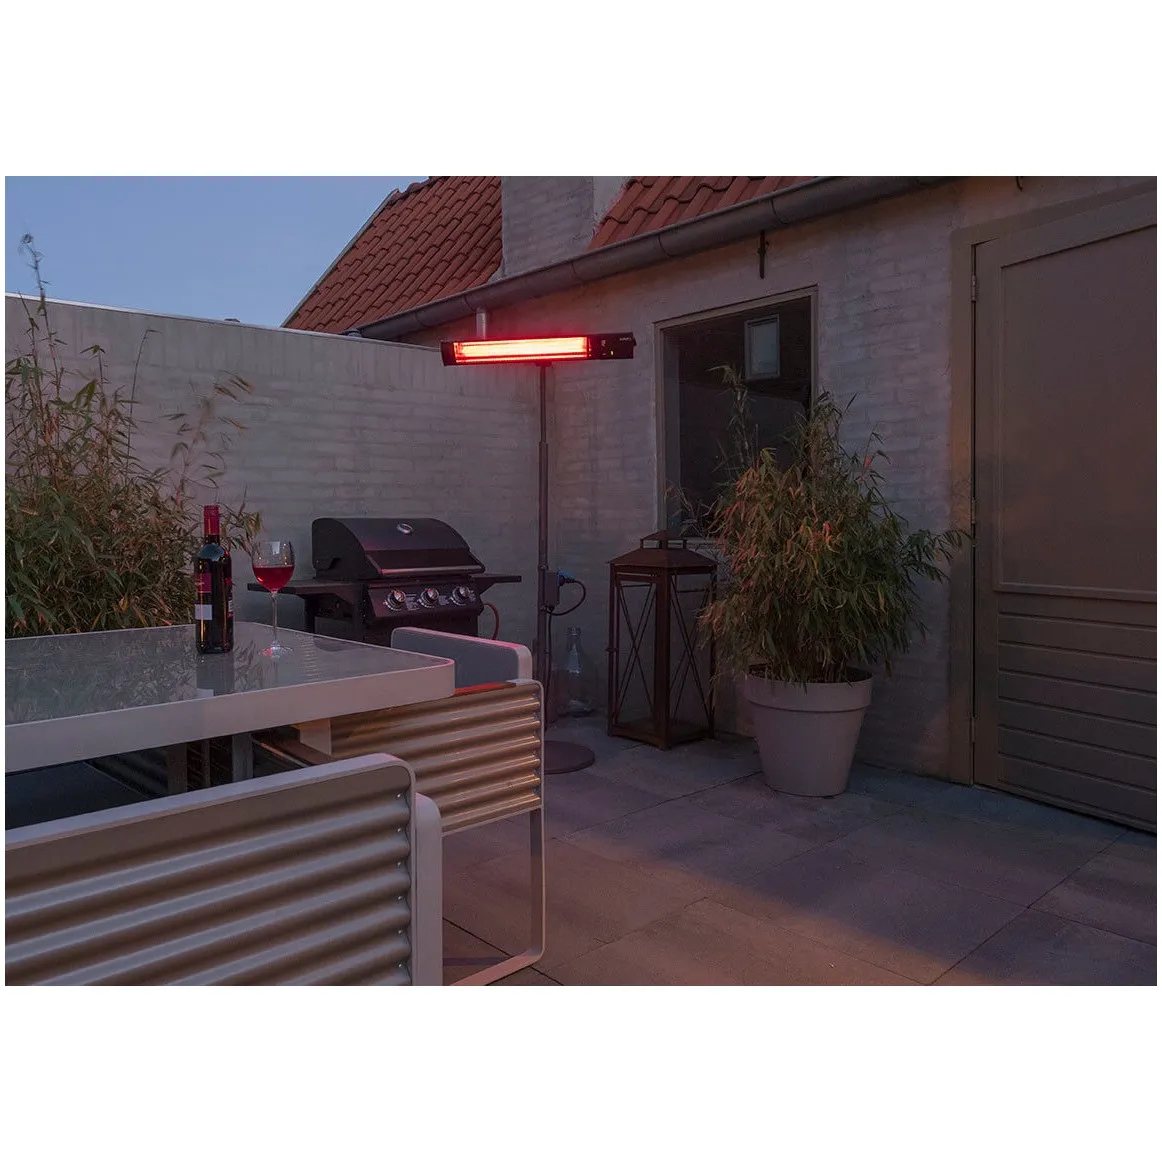 Eurom Golden 2000 Shadow Patioheater